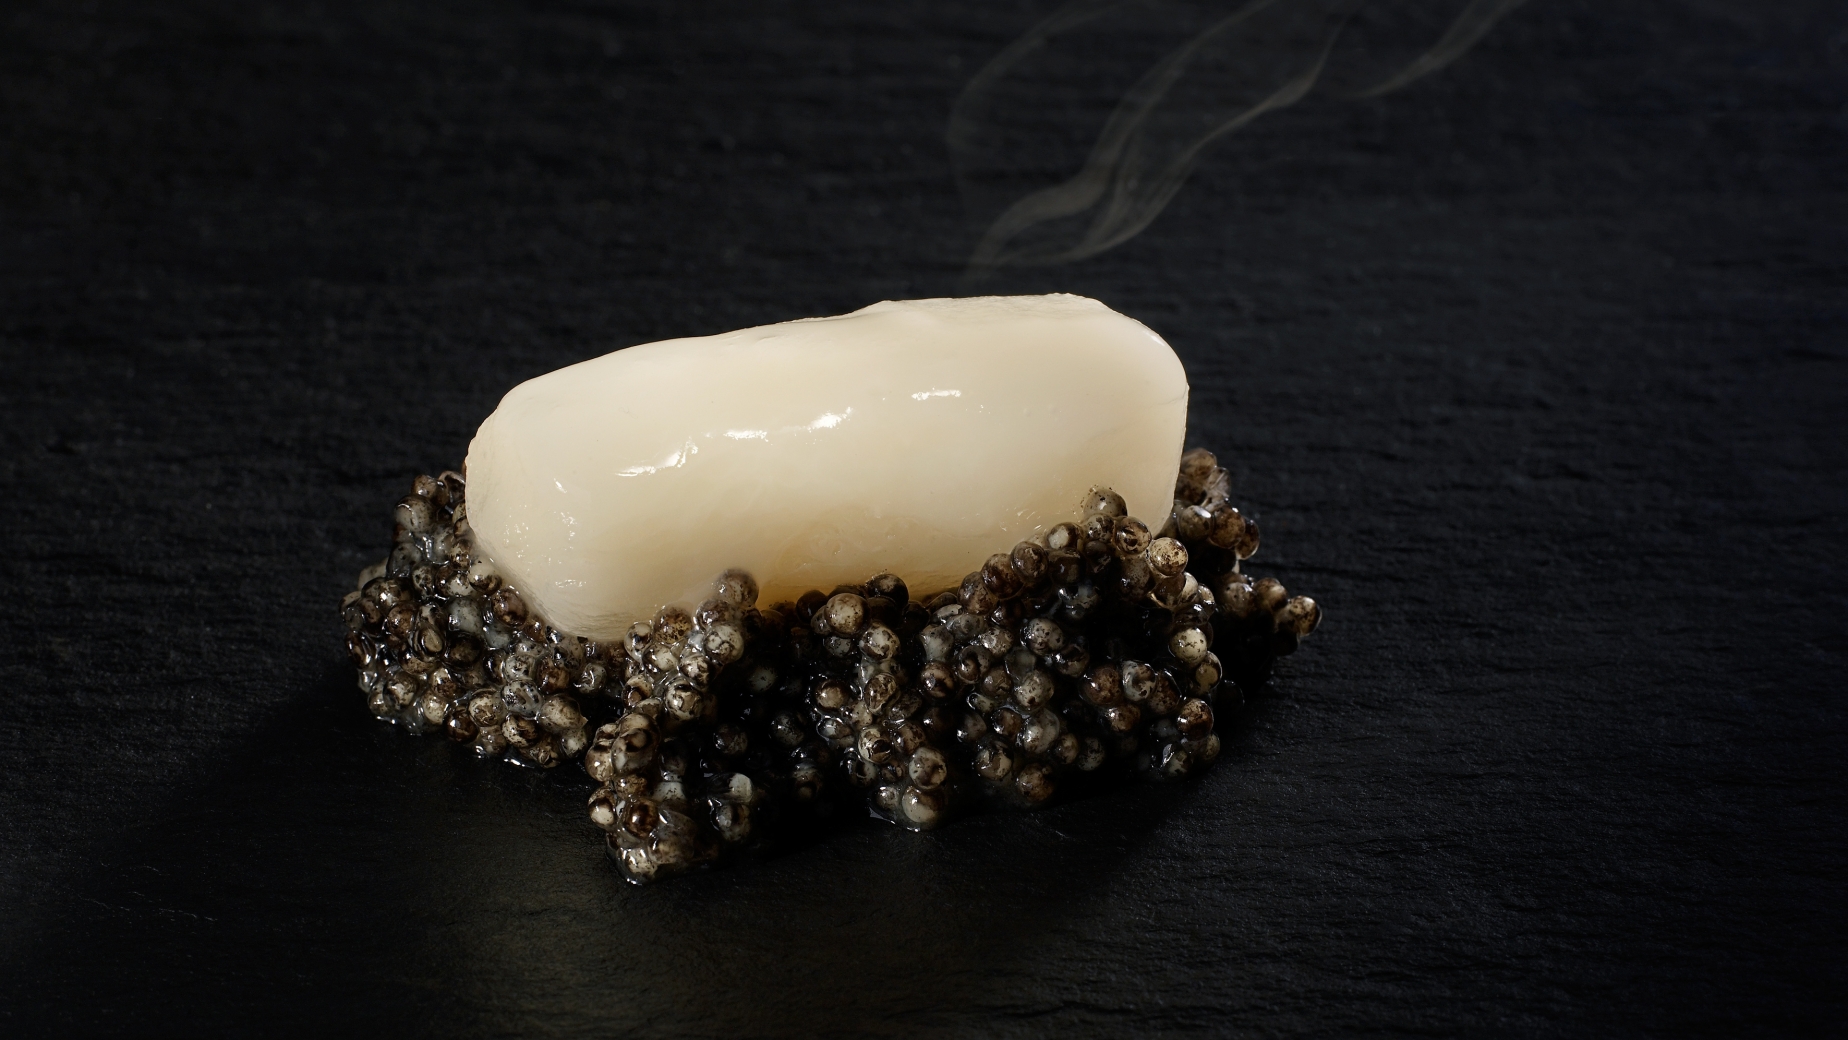 Red radish simmered in a rice broth resting on a spoonful of caviar.
PHOTO: José Luis López de Zubiría / Mugaritz